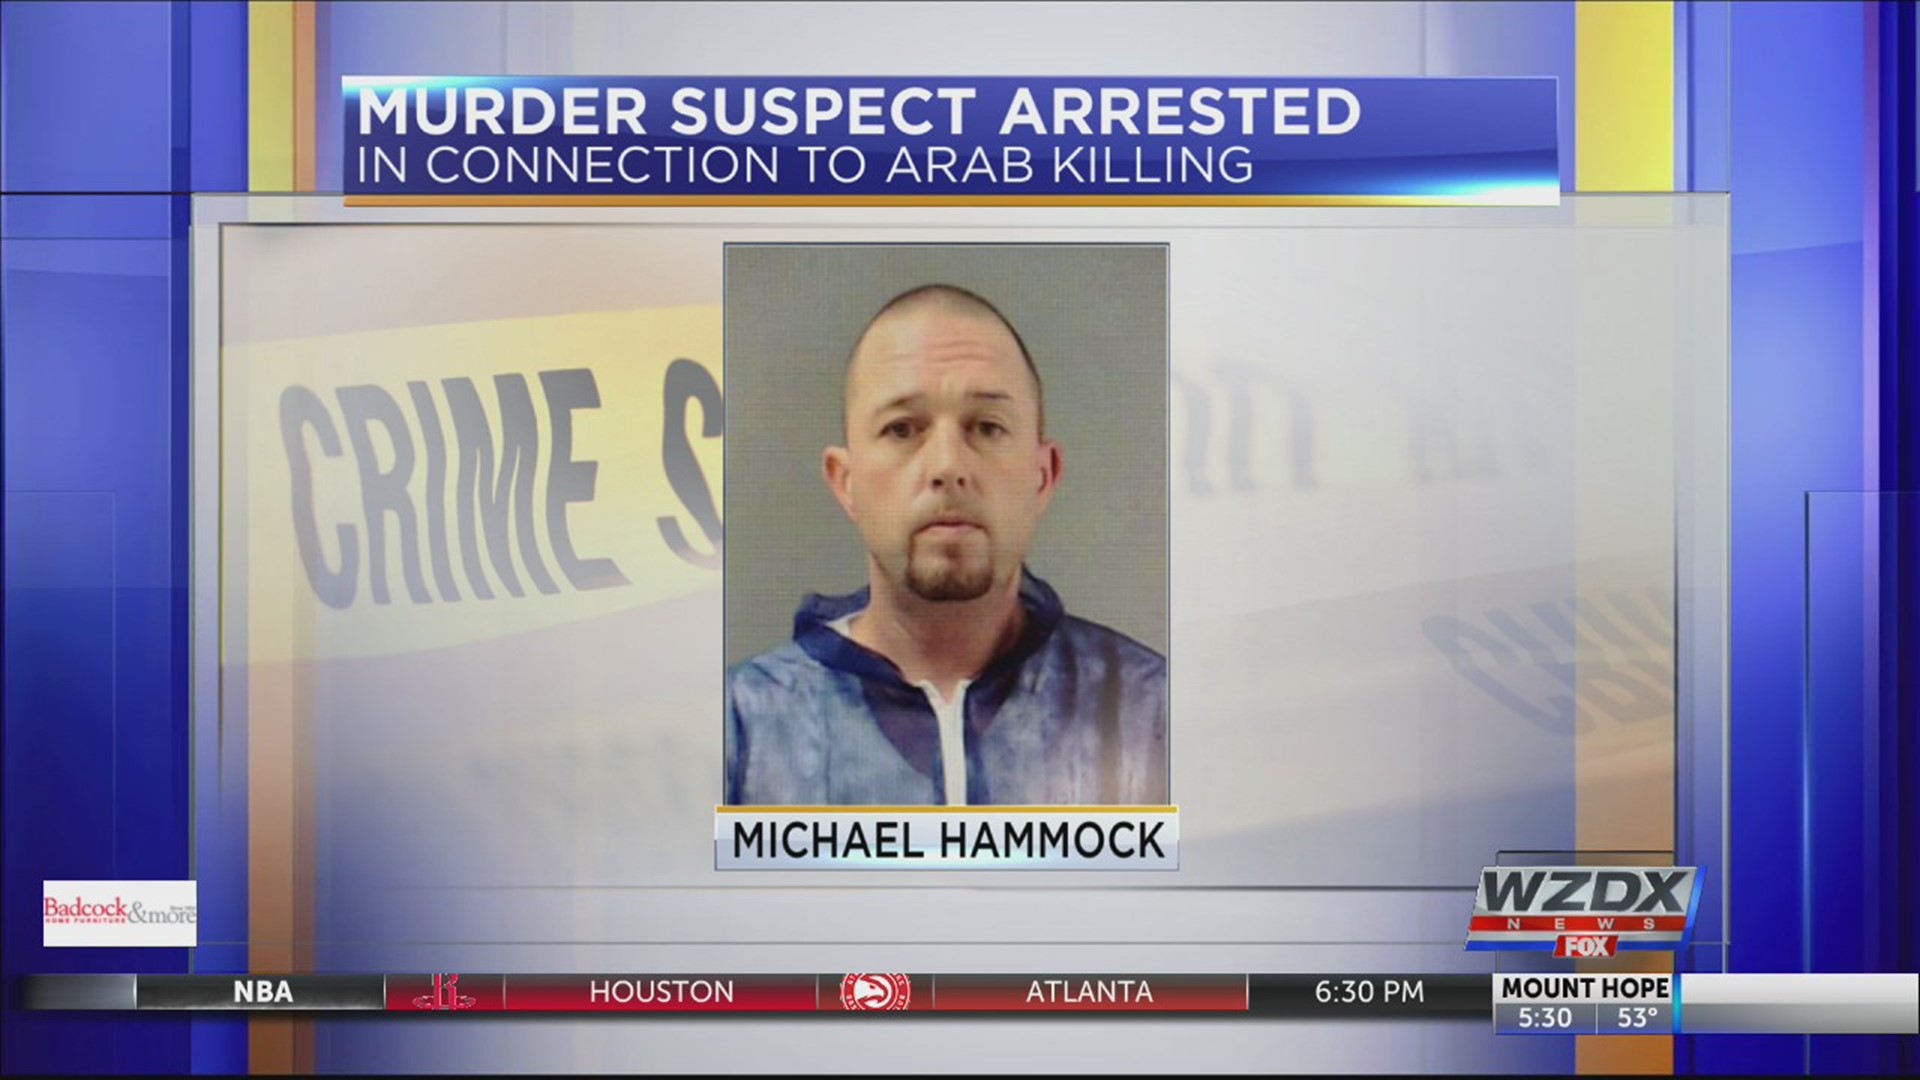 A Huntsville man has been charged in the death of a woman in Arab.